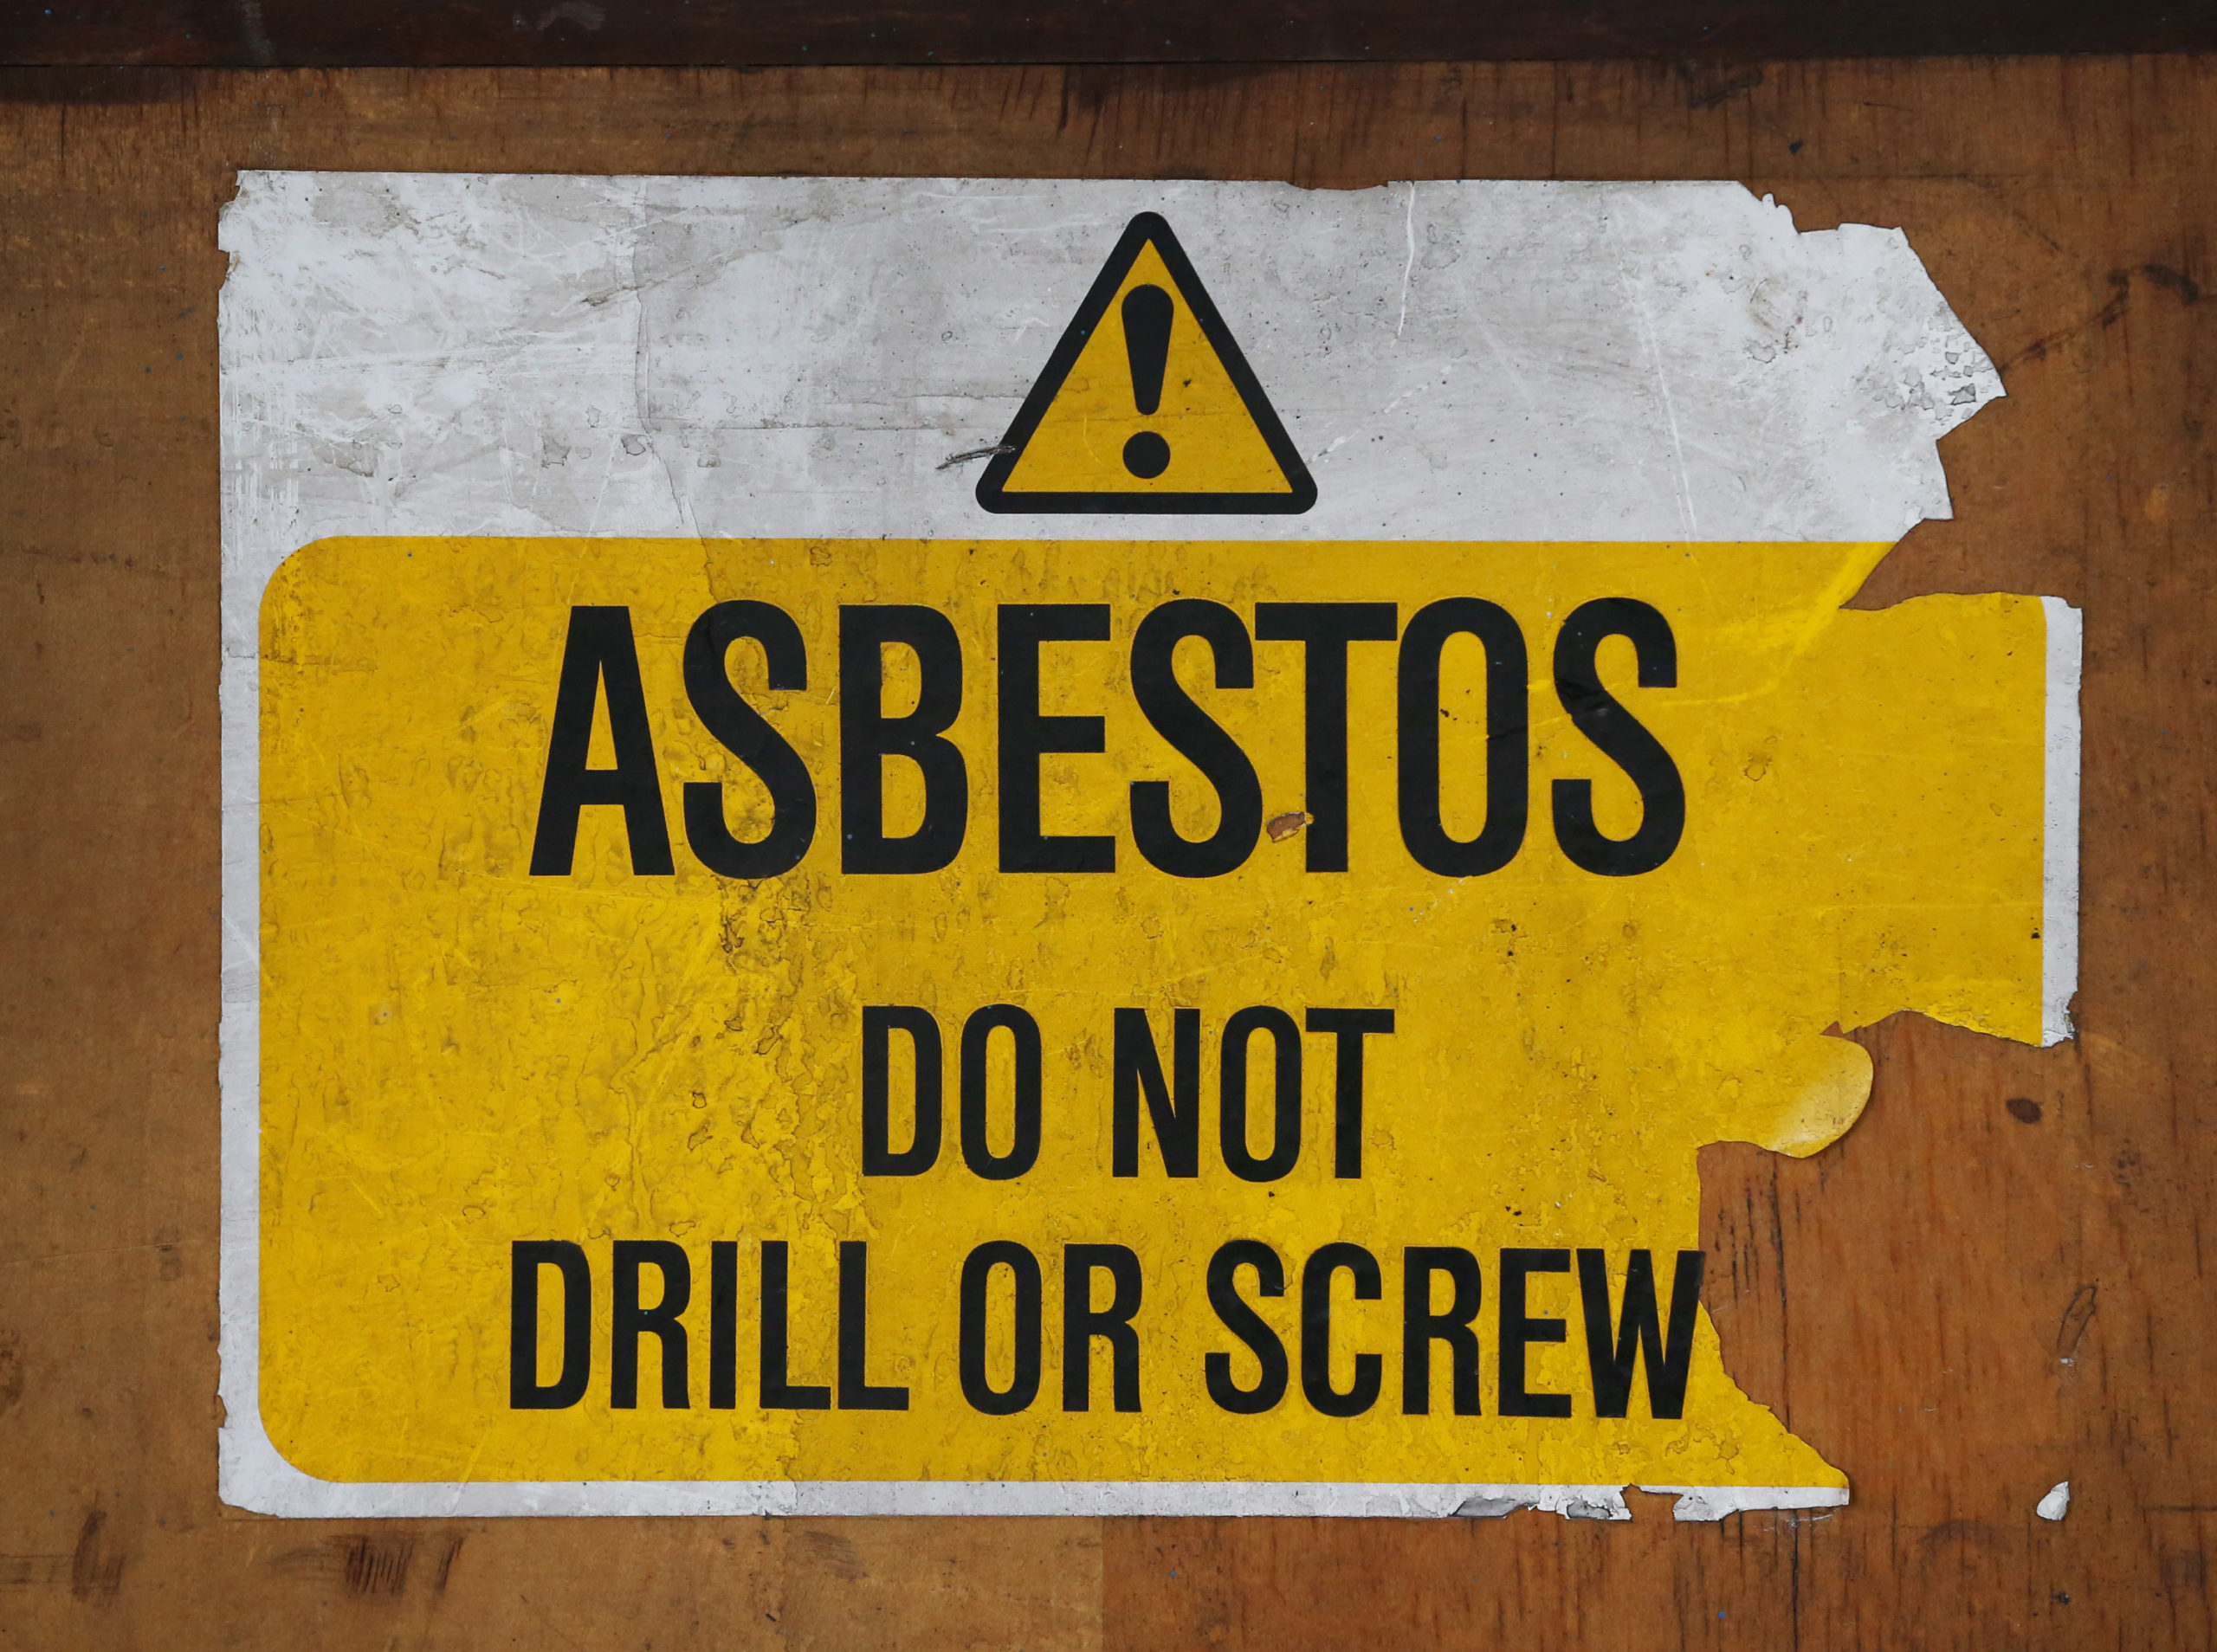 A sign warns of asbestos danger at a former Royal Mail sorting office on October 11, 2013 in London, England. (Photo by Peter Macdiarmid/Getty Images)